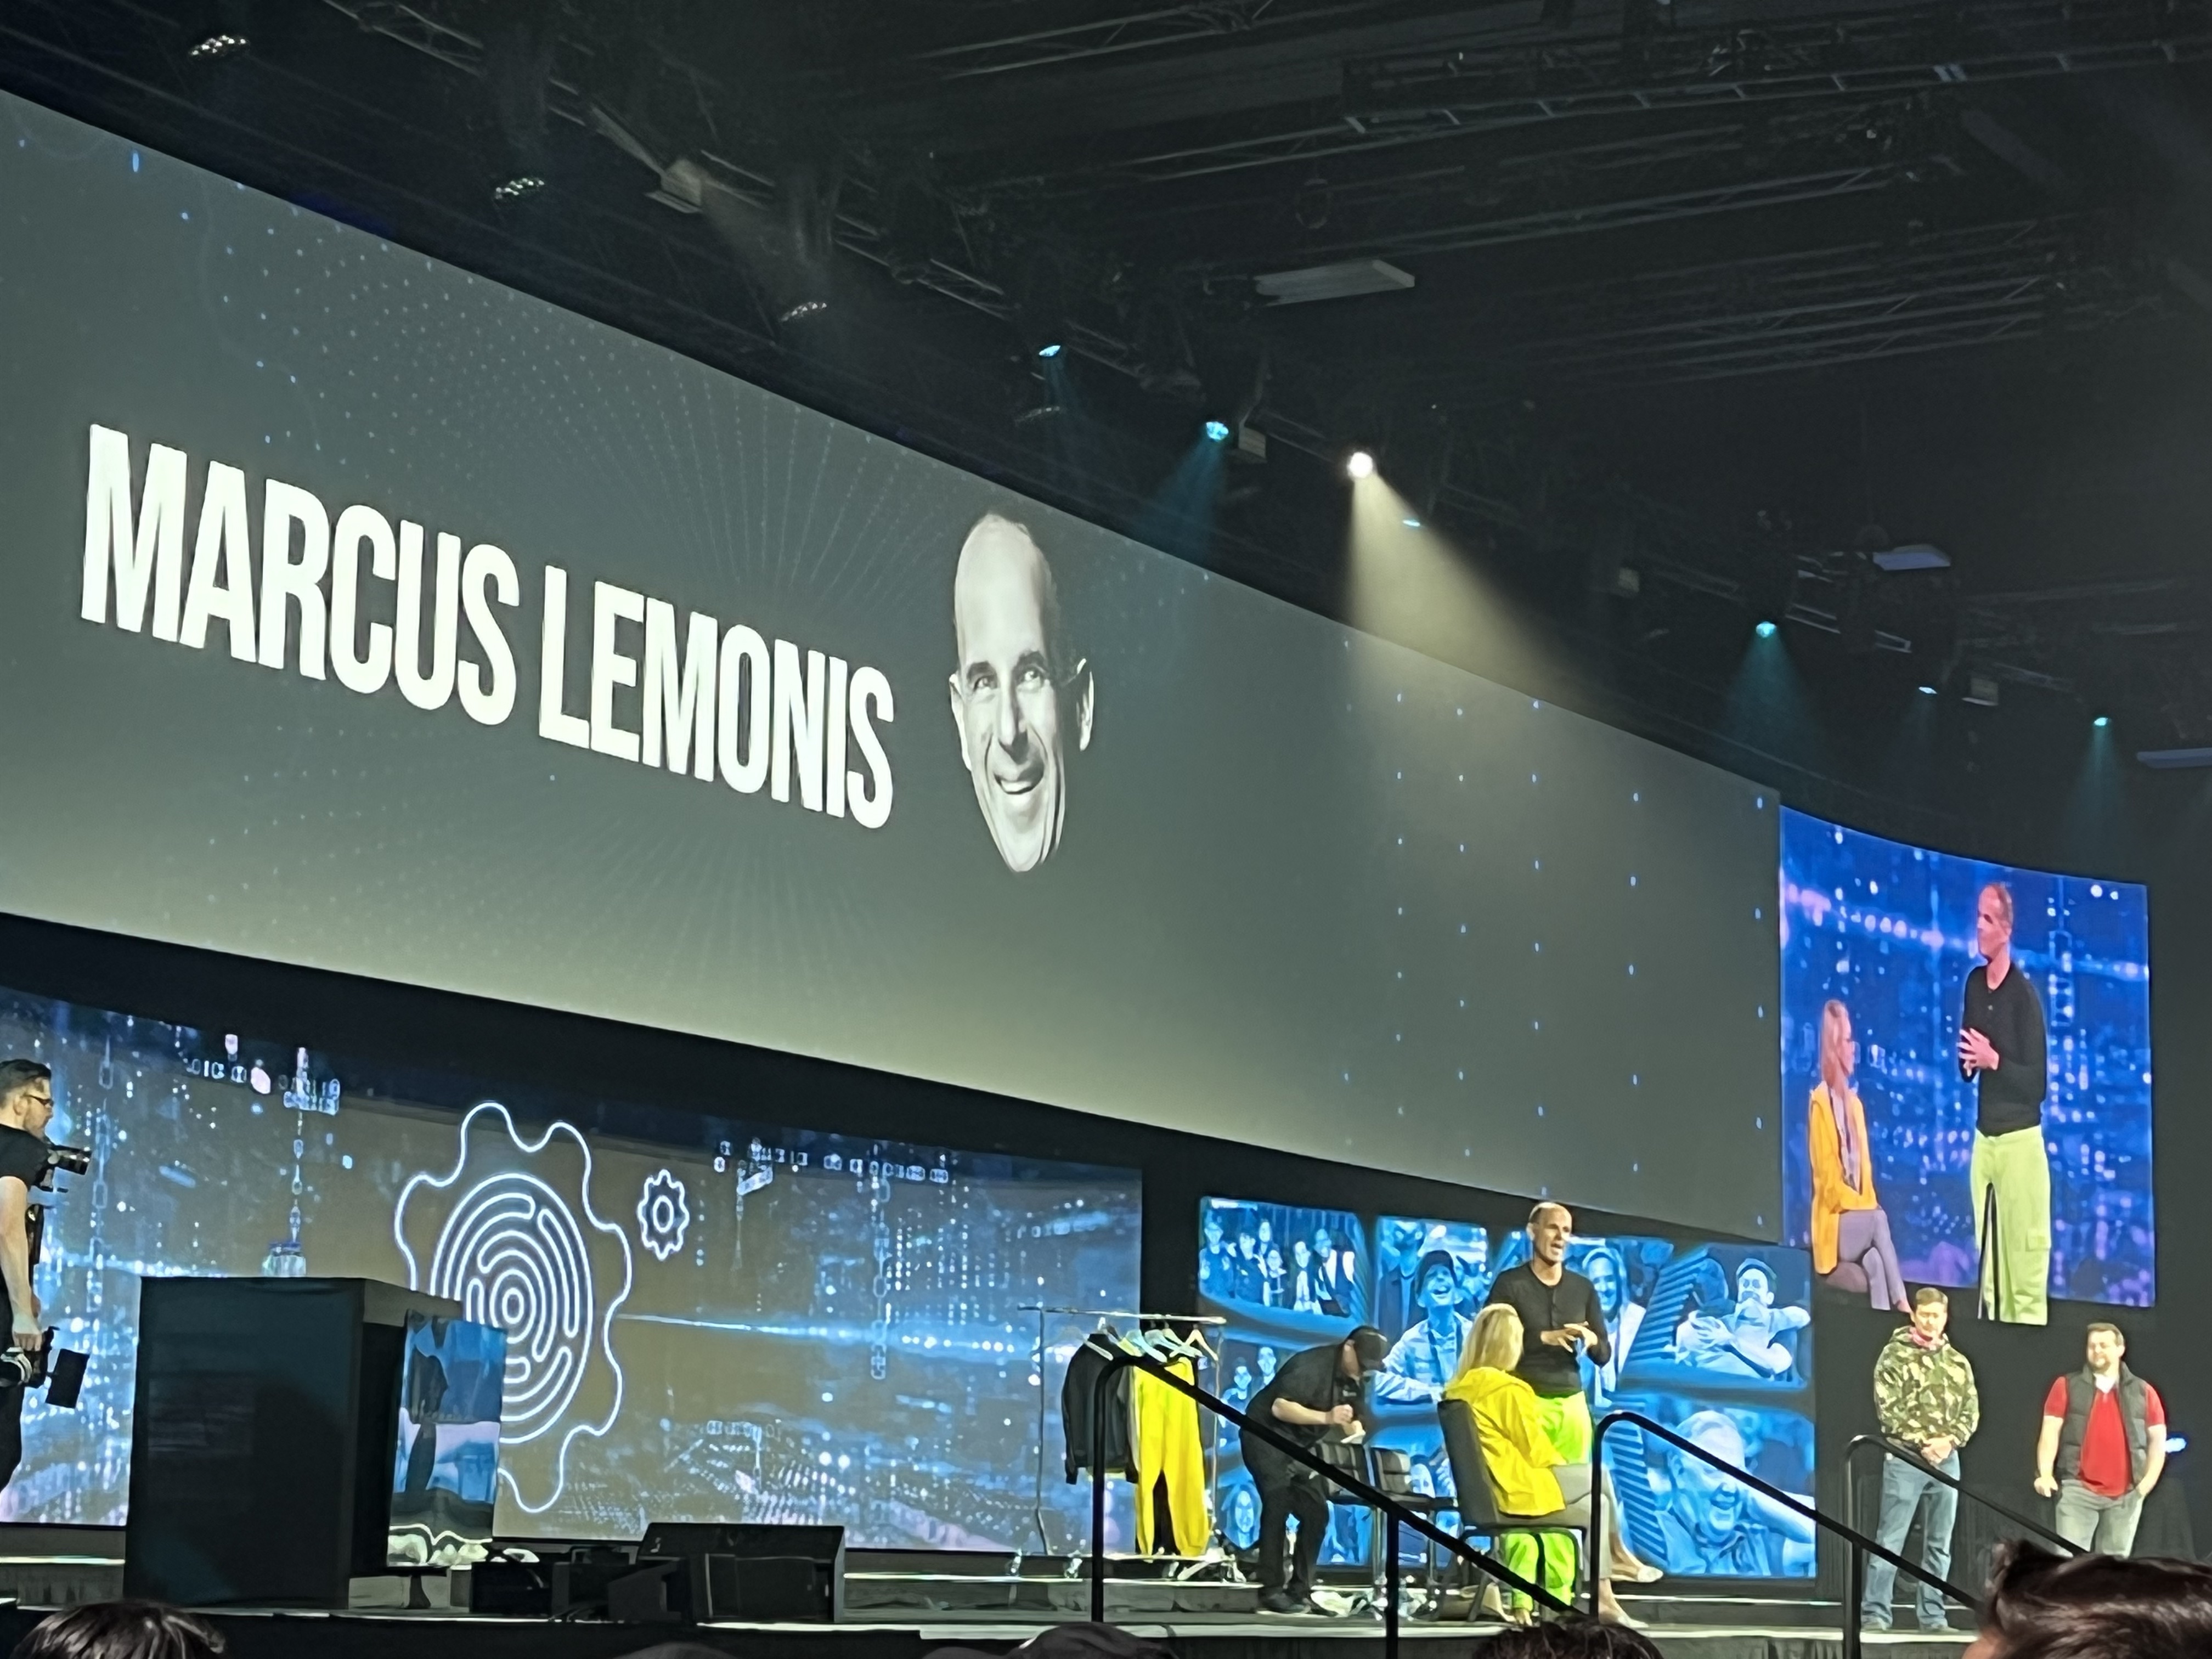 Marcus Lemonis on stage with attendees with a screen advertising him